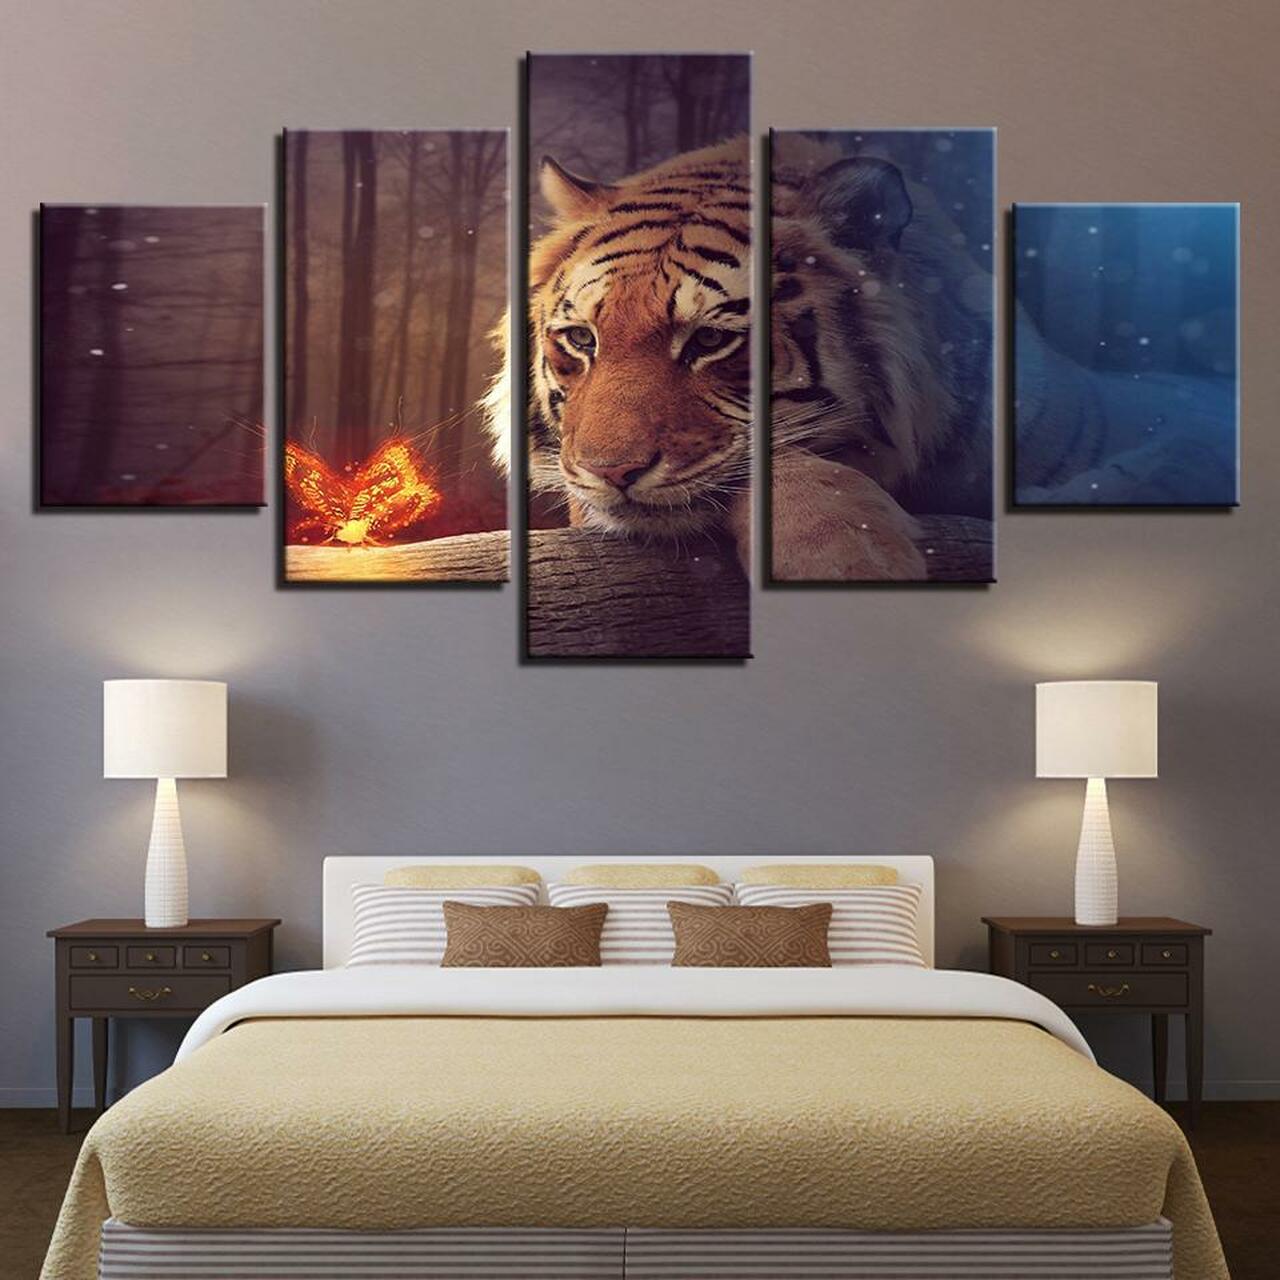 Butterfly and the Tiger 5 Piece Canvas Art Wall Decor